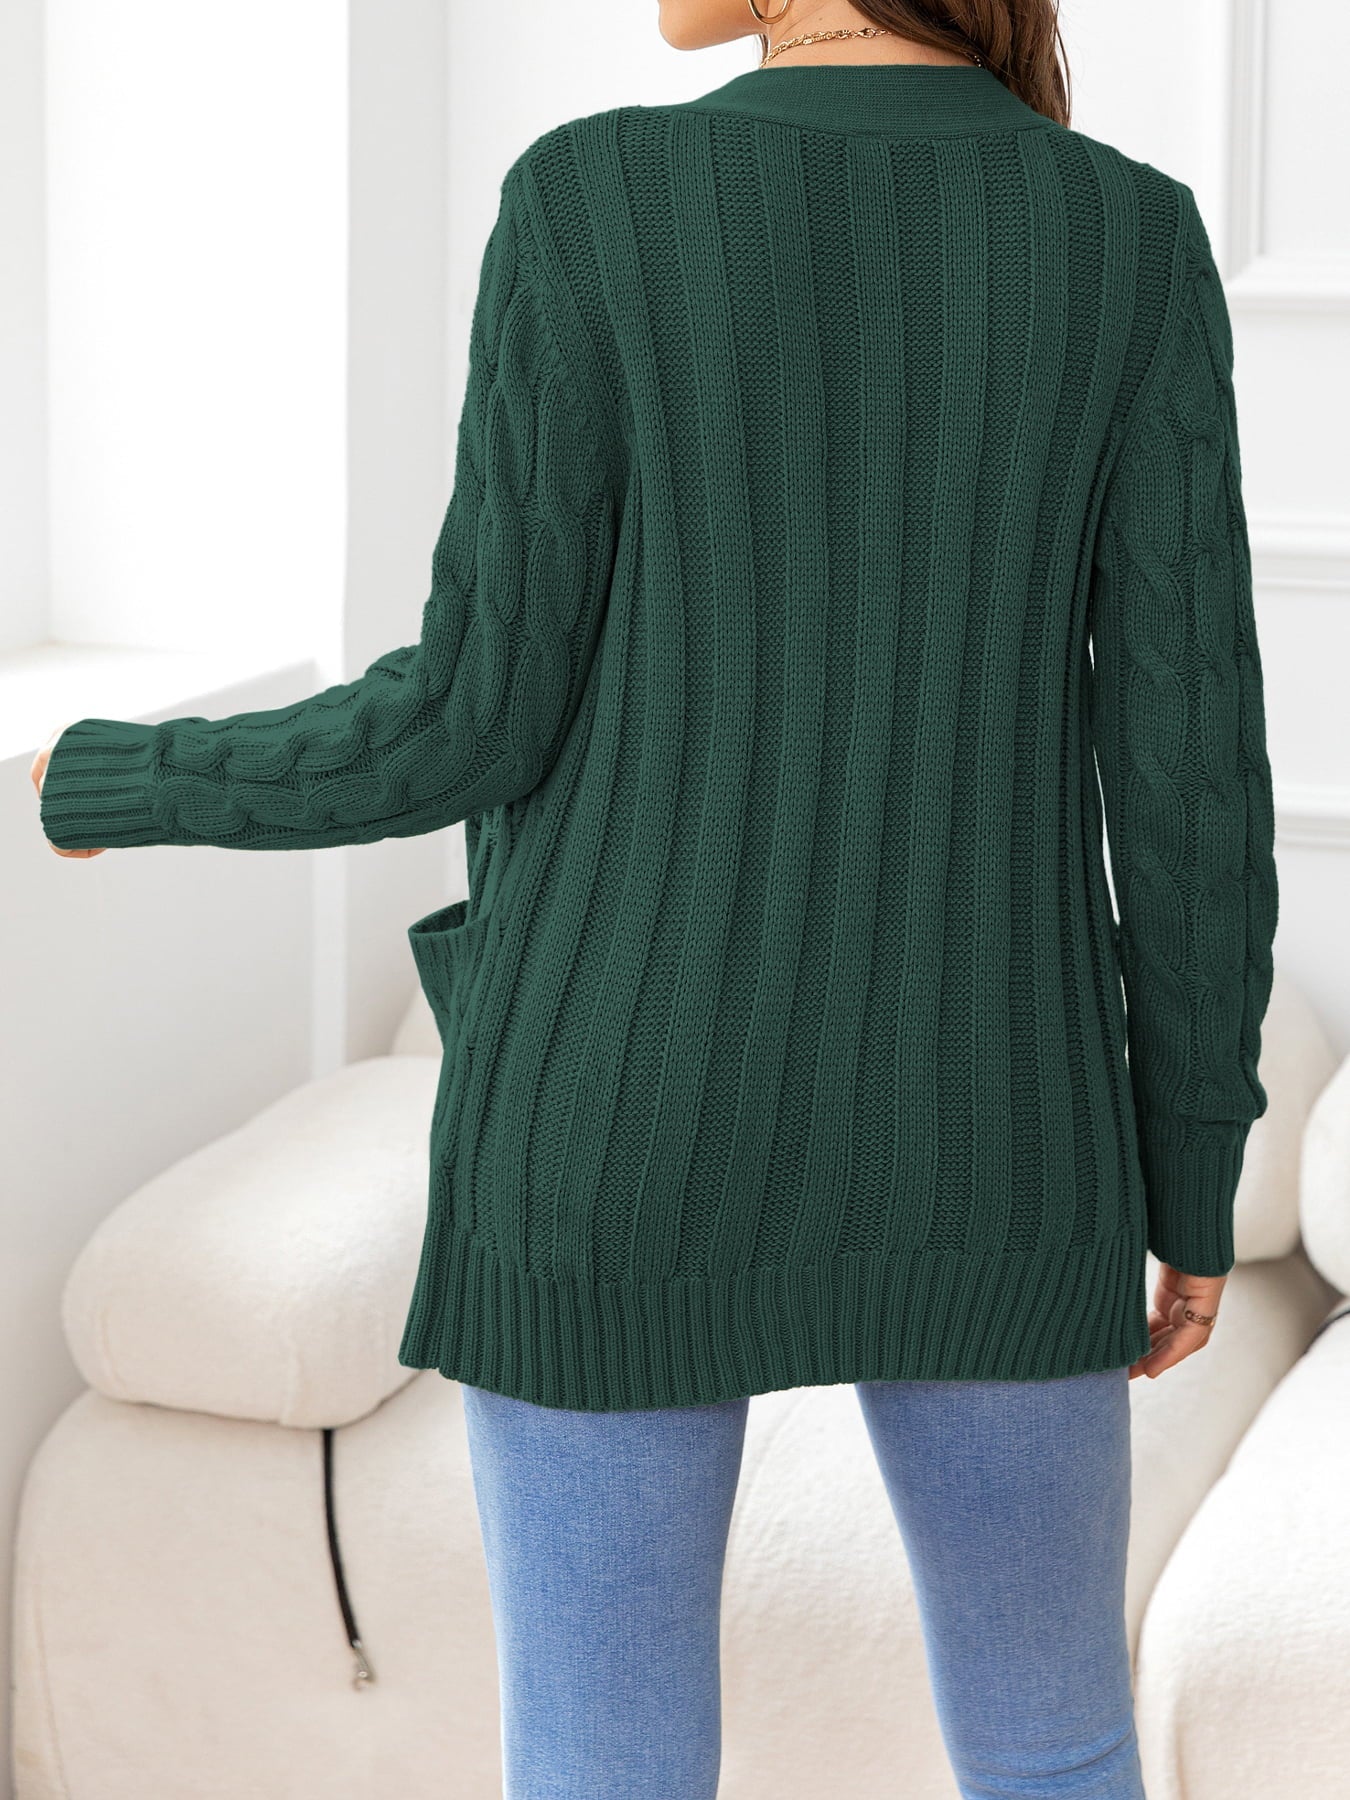 Button Down Cable-Knit Cardigan - Women’s Clothing & Accessories - Shirts & Tops - 21 - 2024